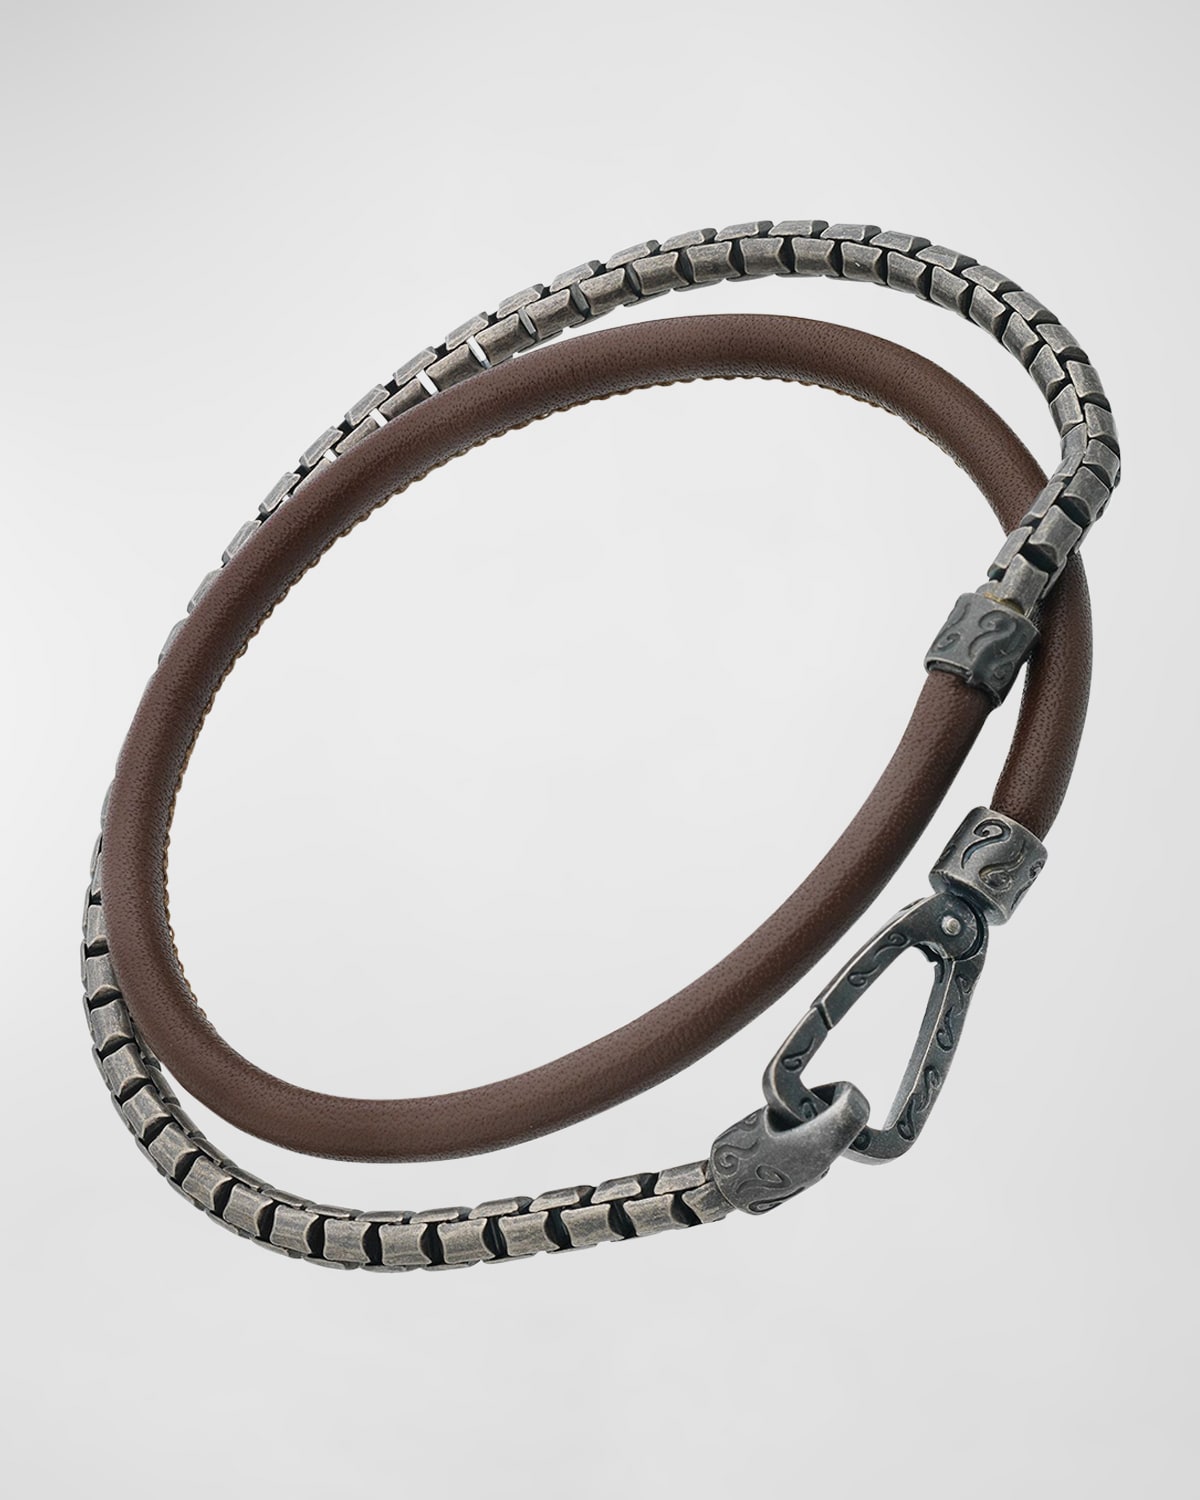 Men's Double Mix Brown Smooth Leather and Oxidized Silver Chain Bracelet